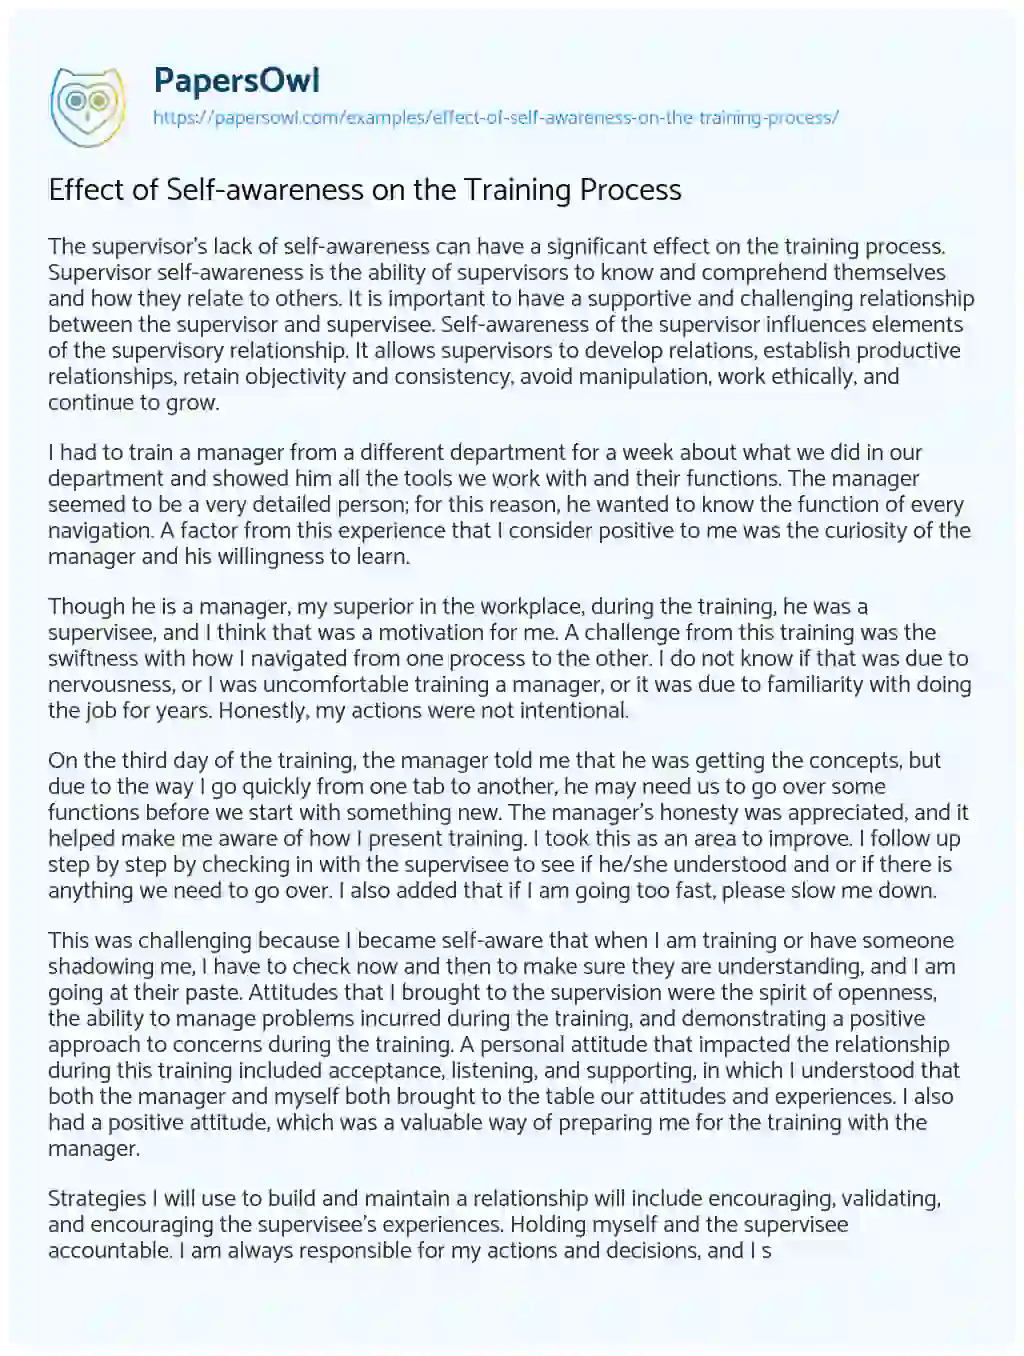 Essay on Effect of Self-awareness on the Training Process